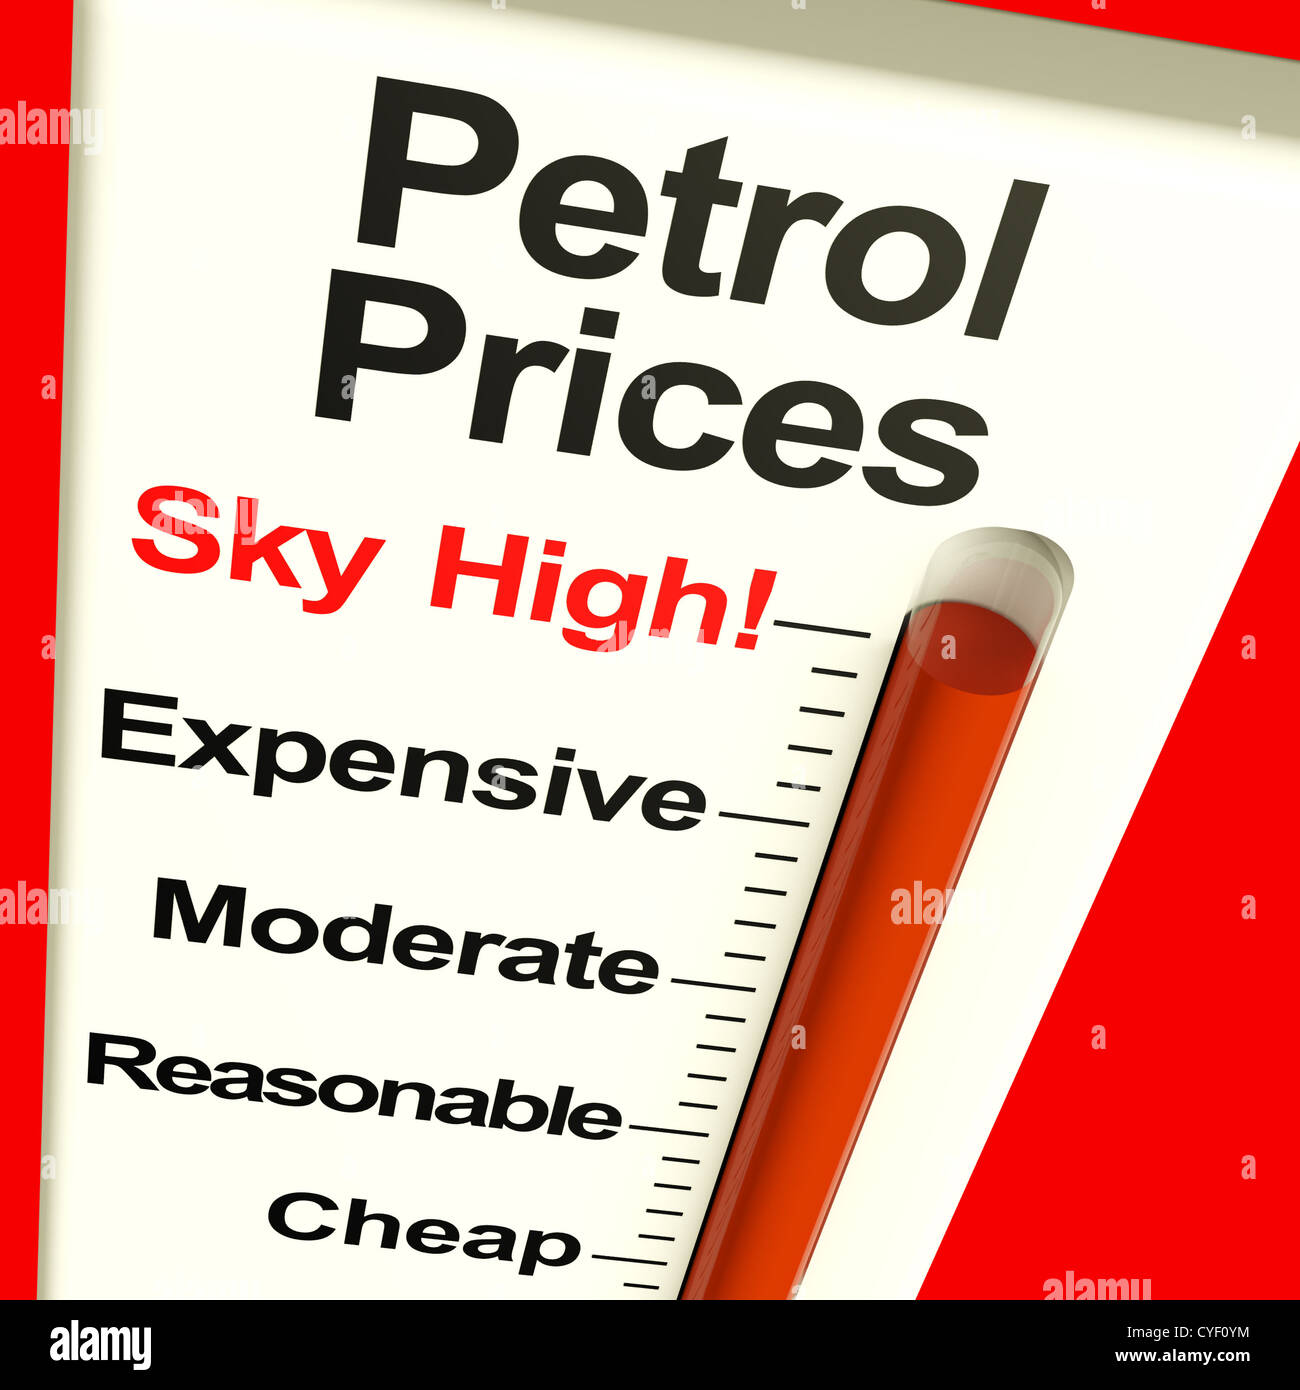 Petrol Prices Sky High Monitor Showing Soaring Fuel Expense Stock Photo